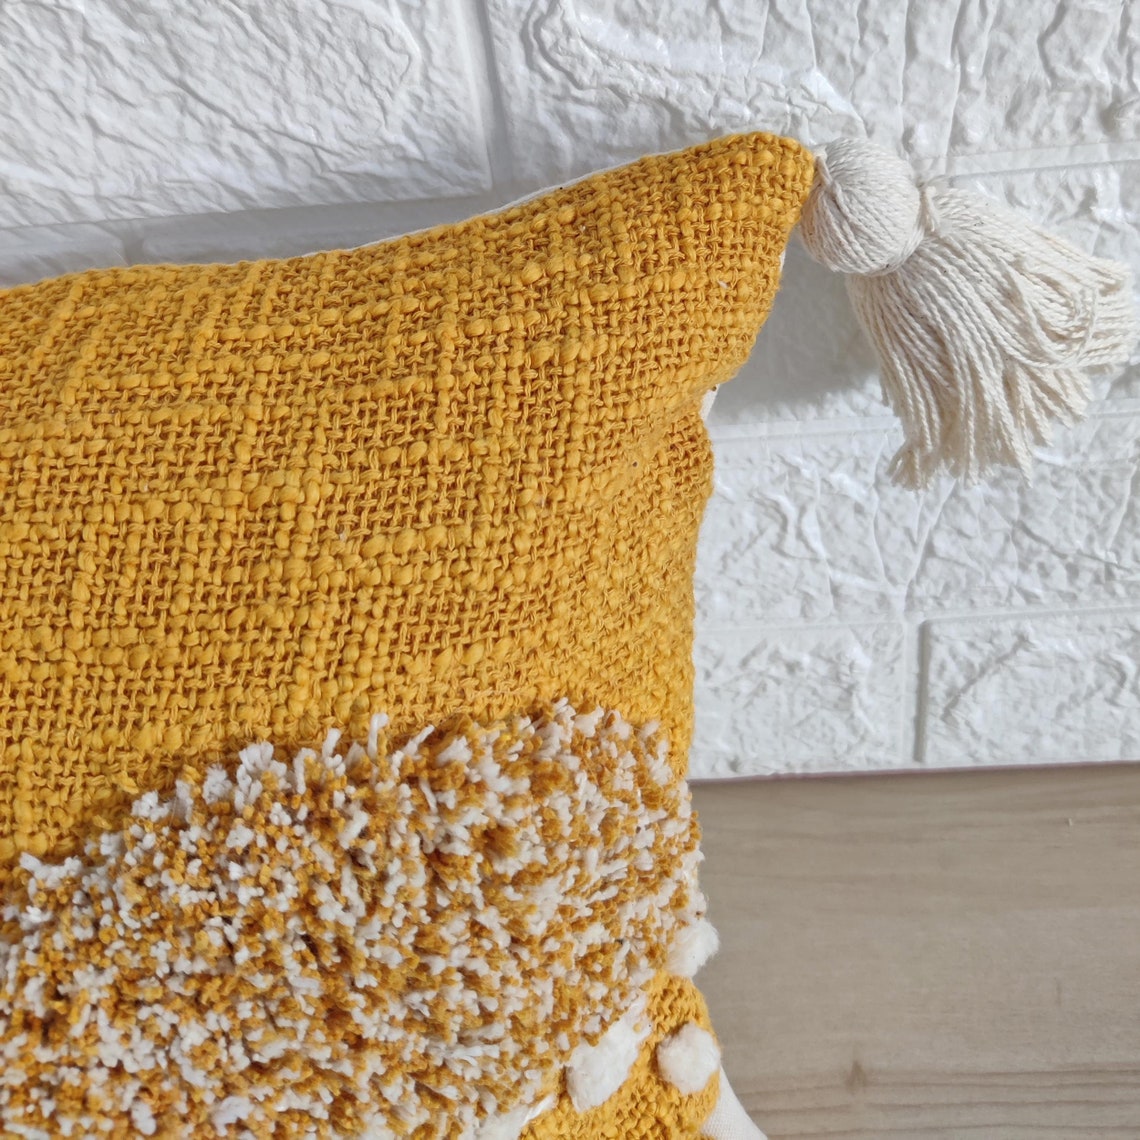 Mustard Yellow & Ivory Hand Embroidered Tufted Textured Cotton Cushion Cover